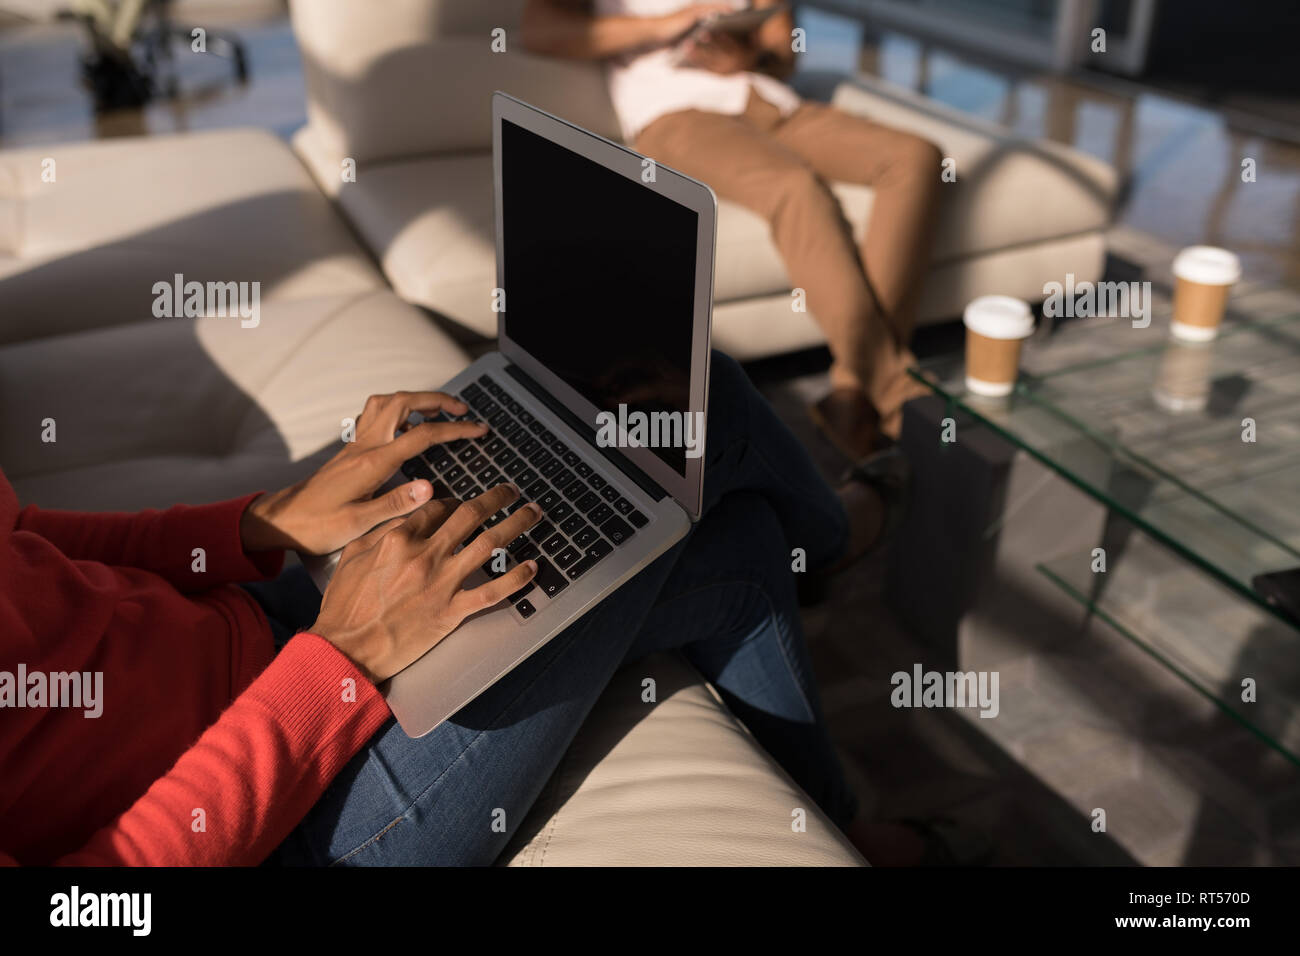 Female executive using laptop in l'office Banque D'Images